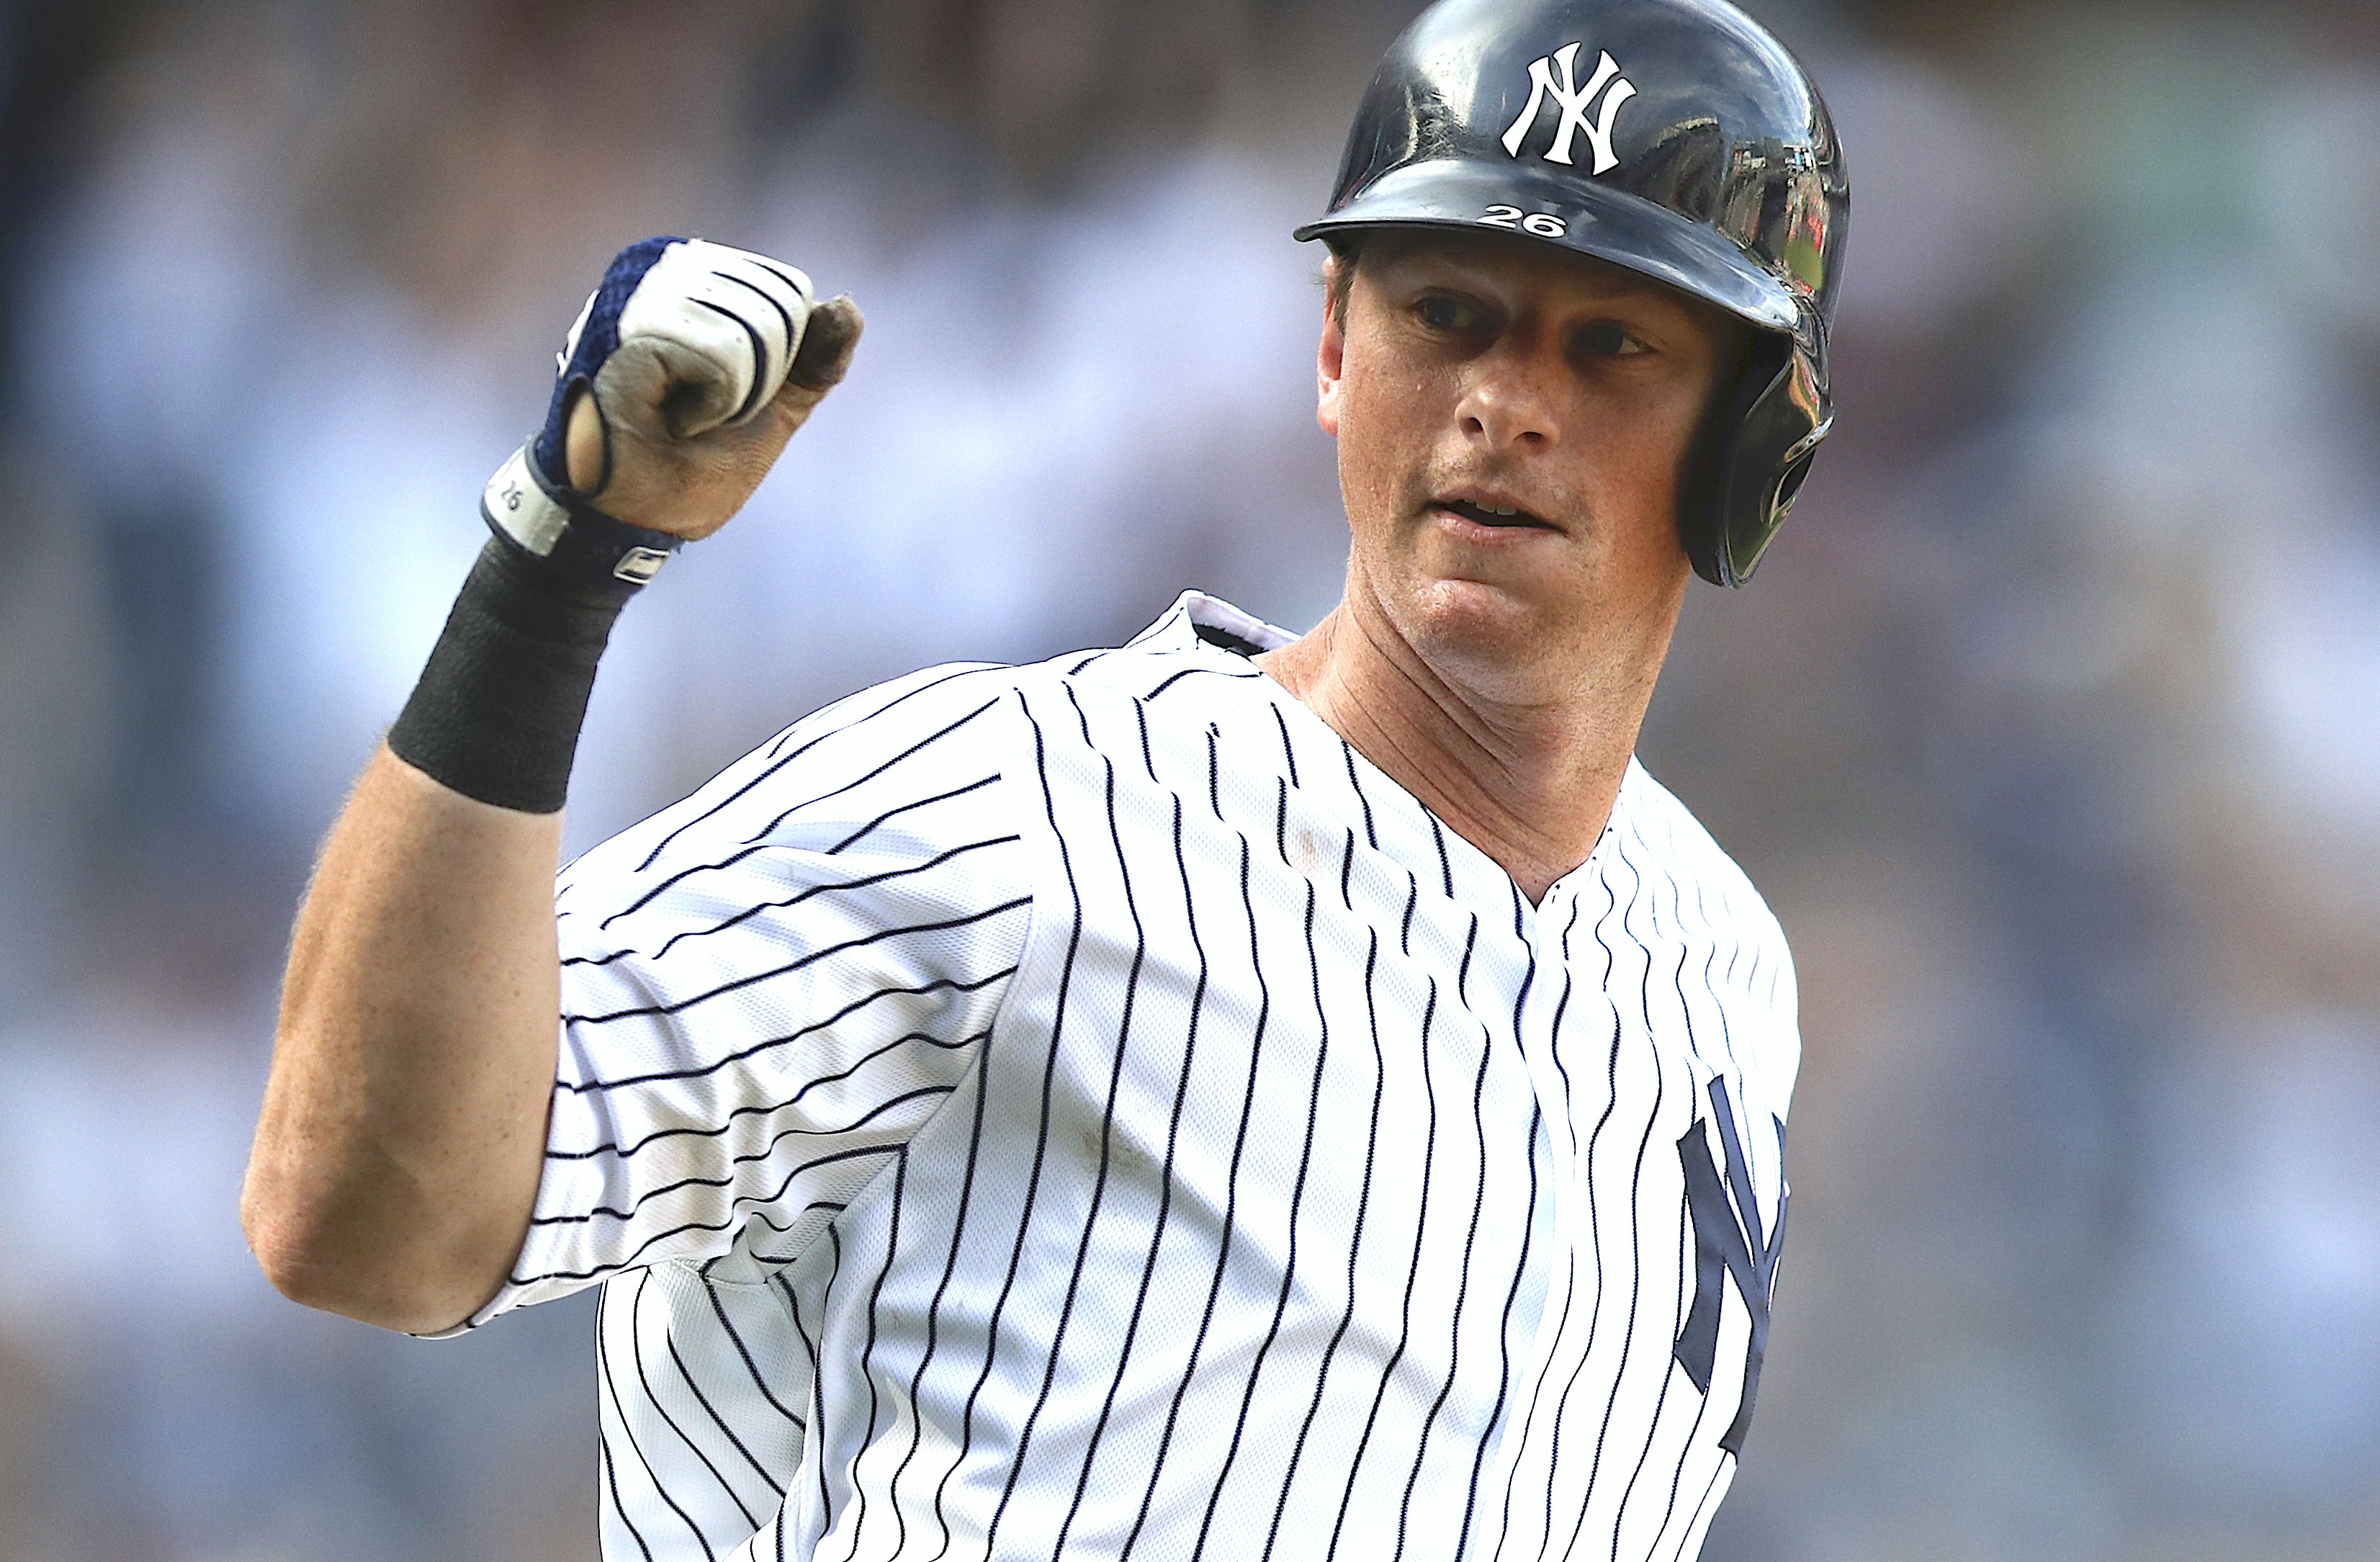 Why won't the Yankees re-sign DJ LeMahieu? A few reasons why it's